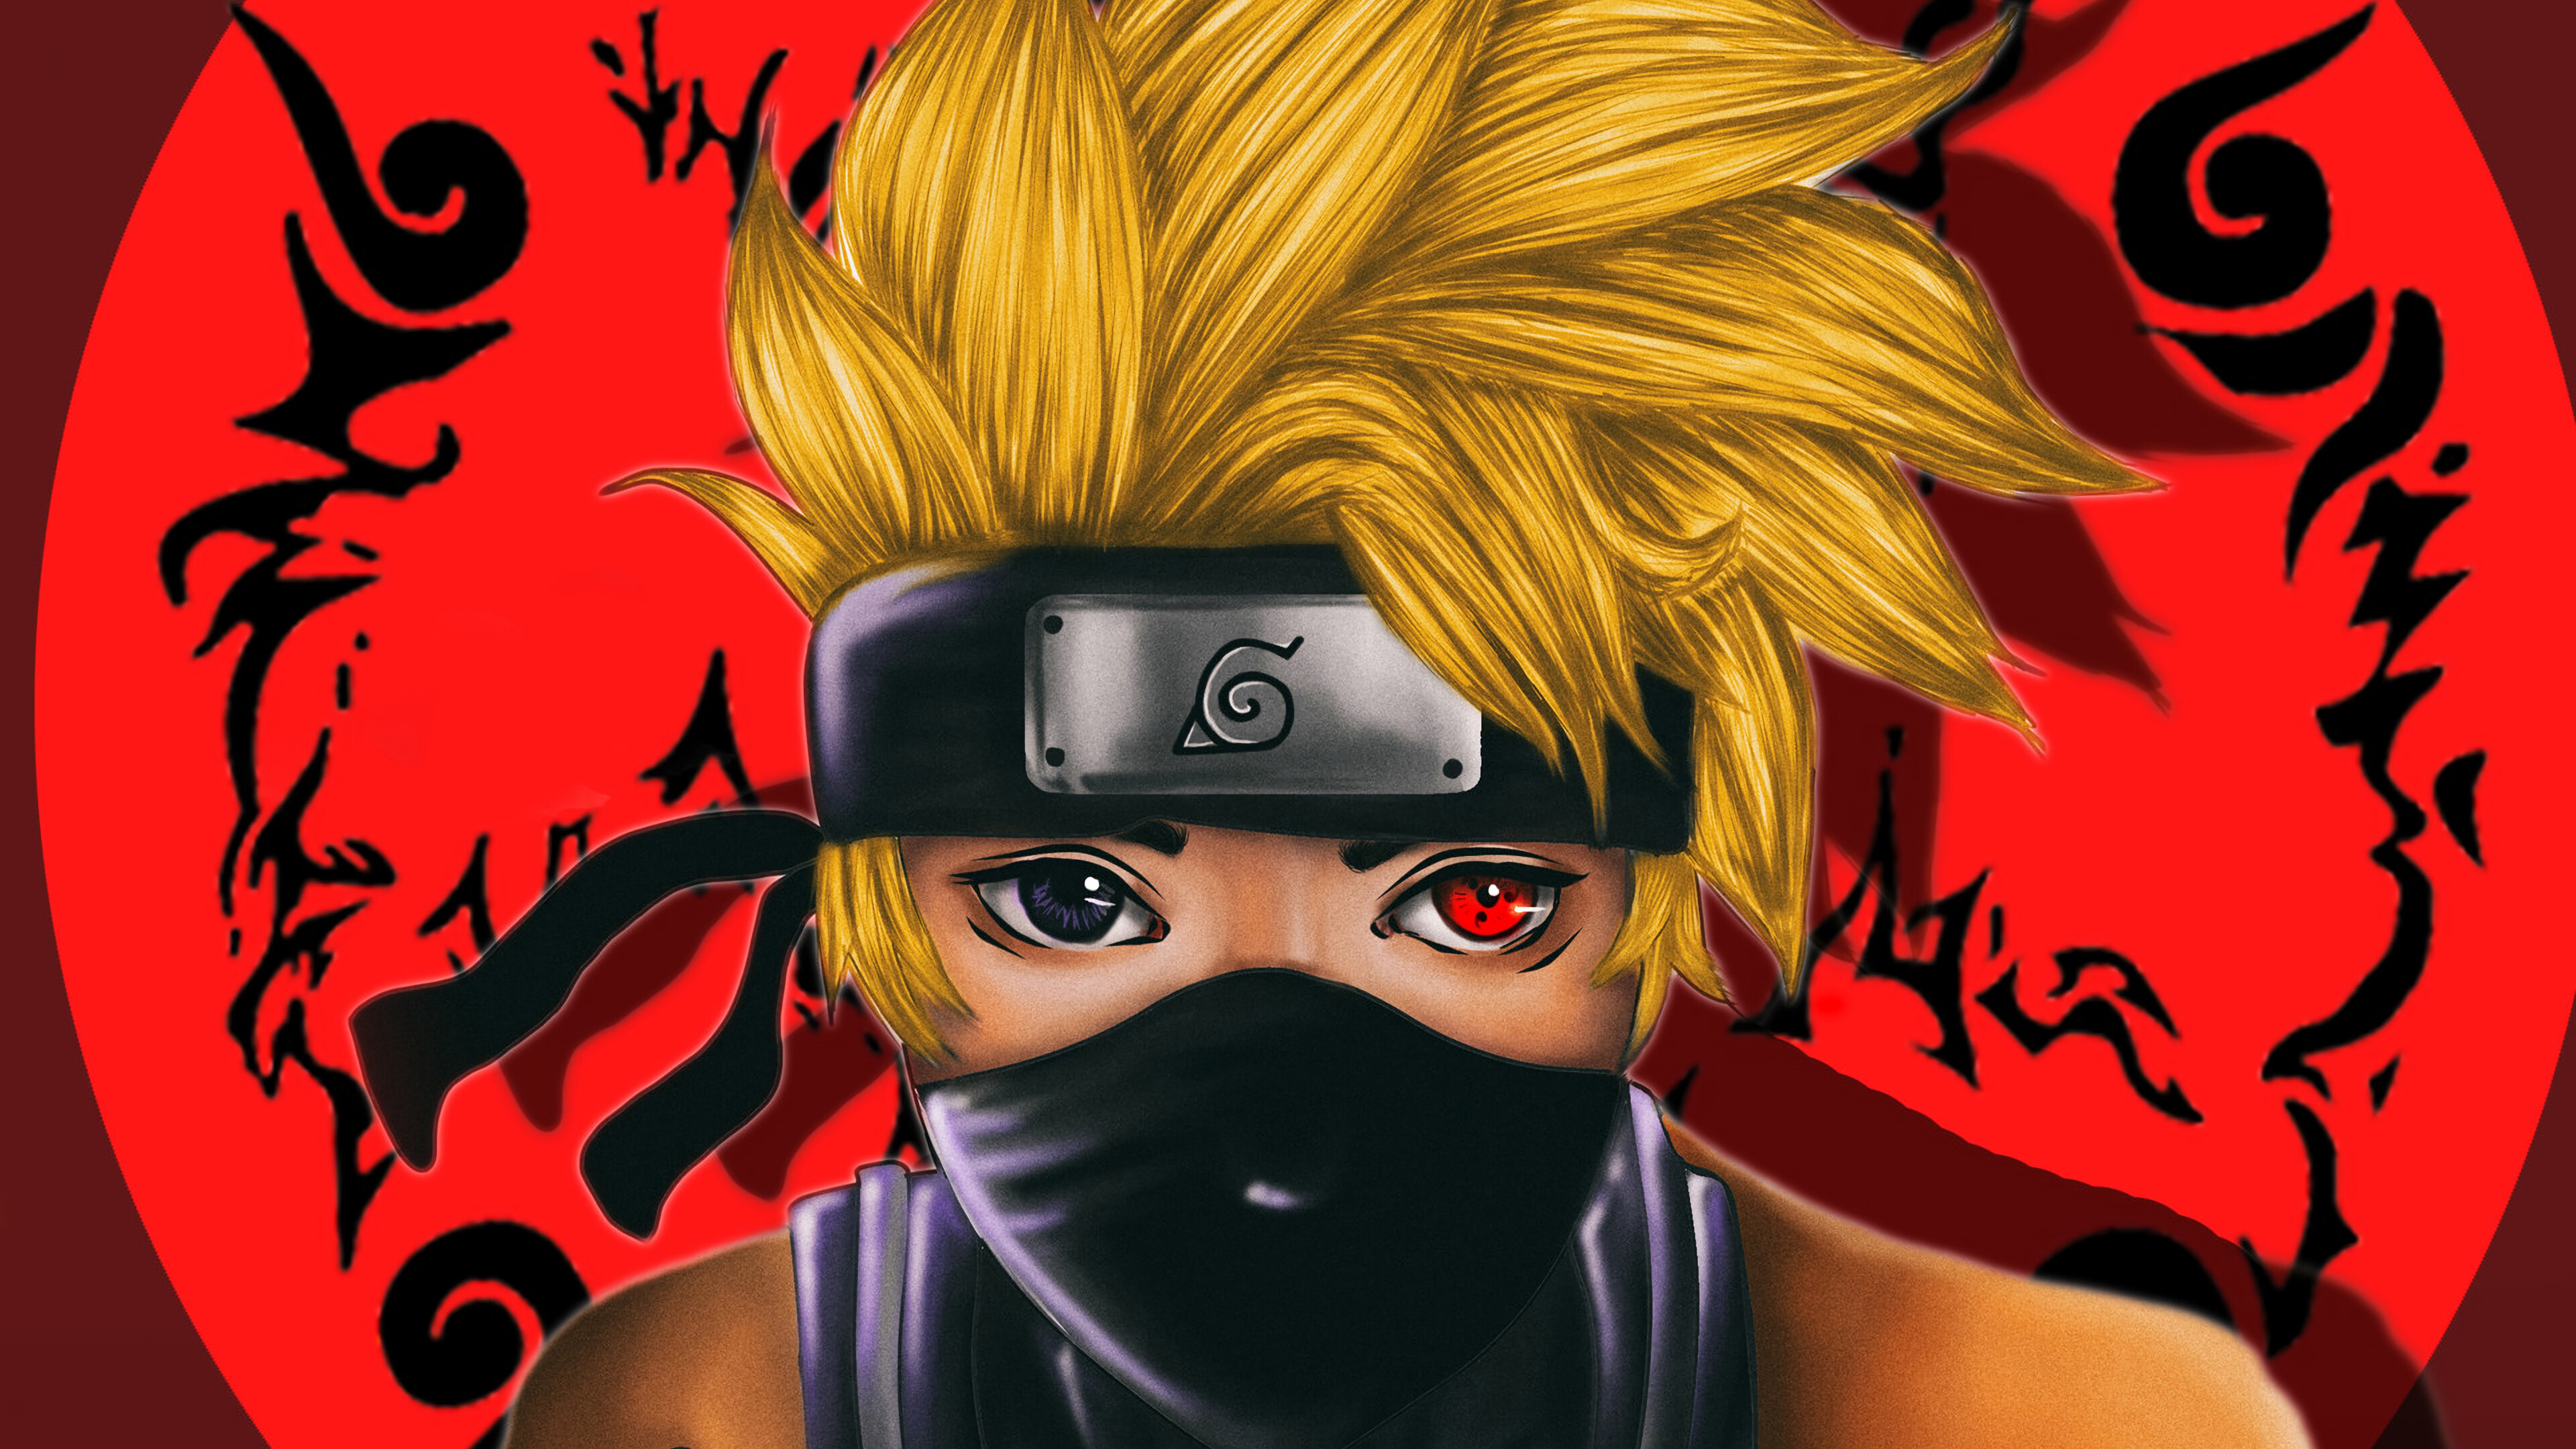 Naruto: A young ninja who seeks recognition from his peers and dreams of becoming the Hokage. 3840x2160 4K Wallpaper.